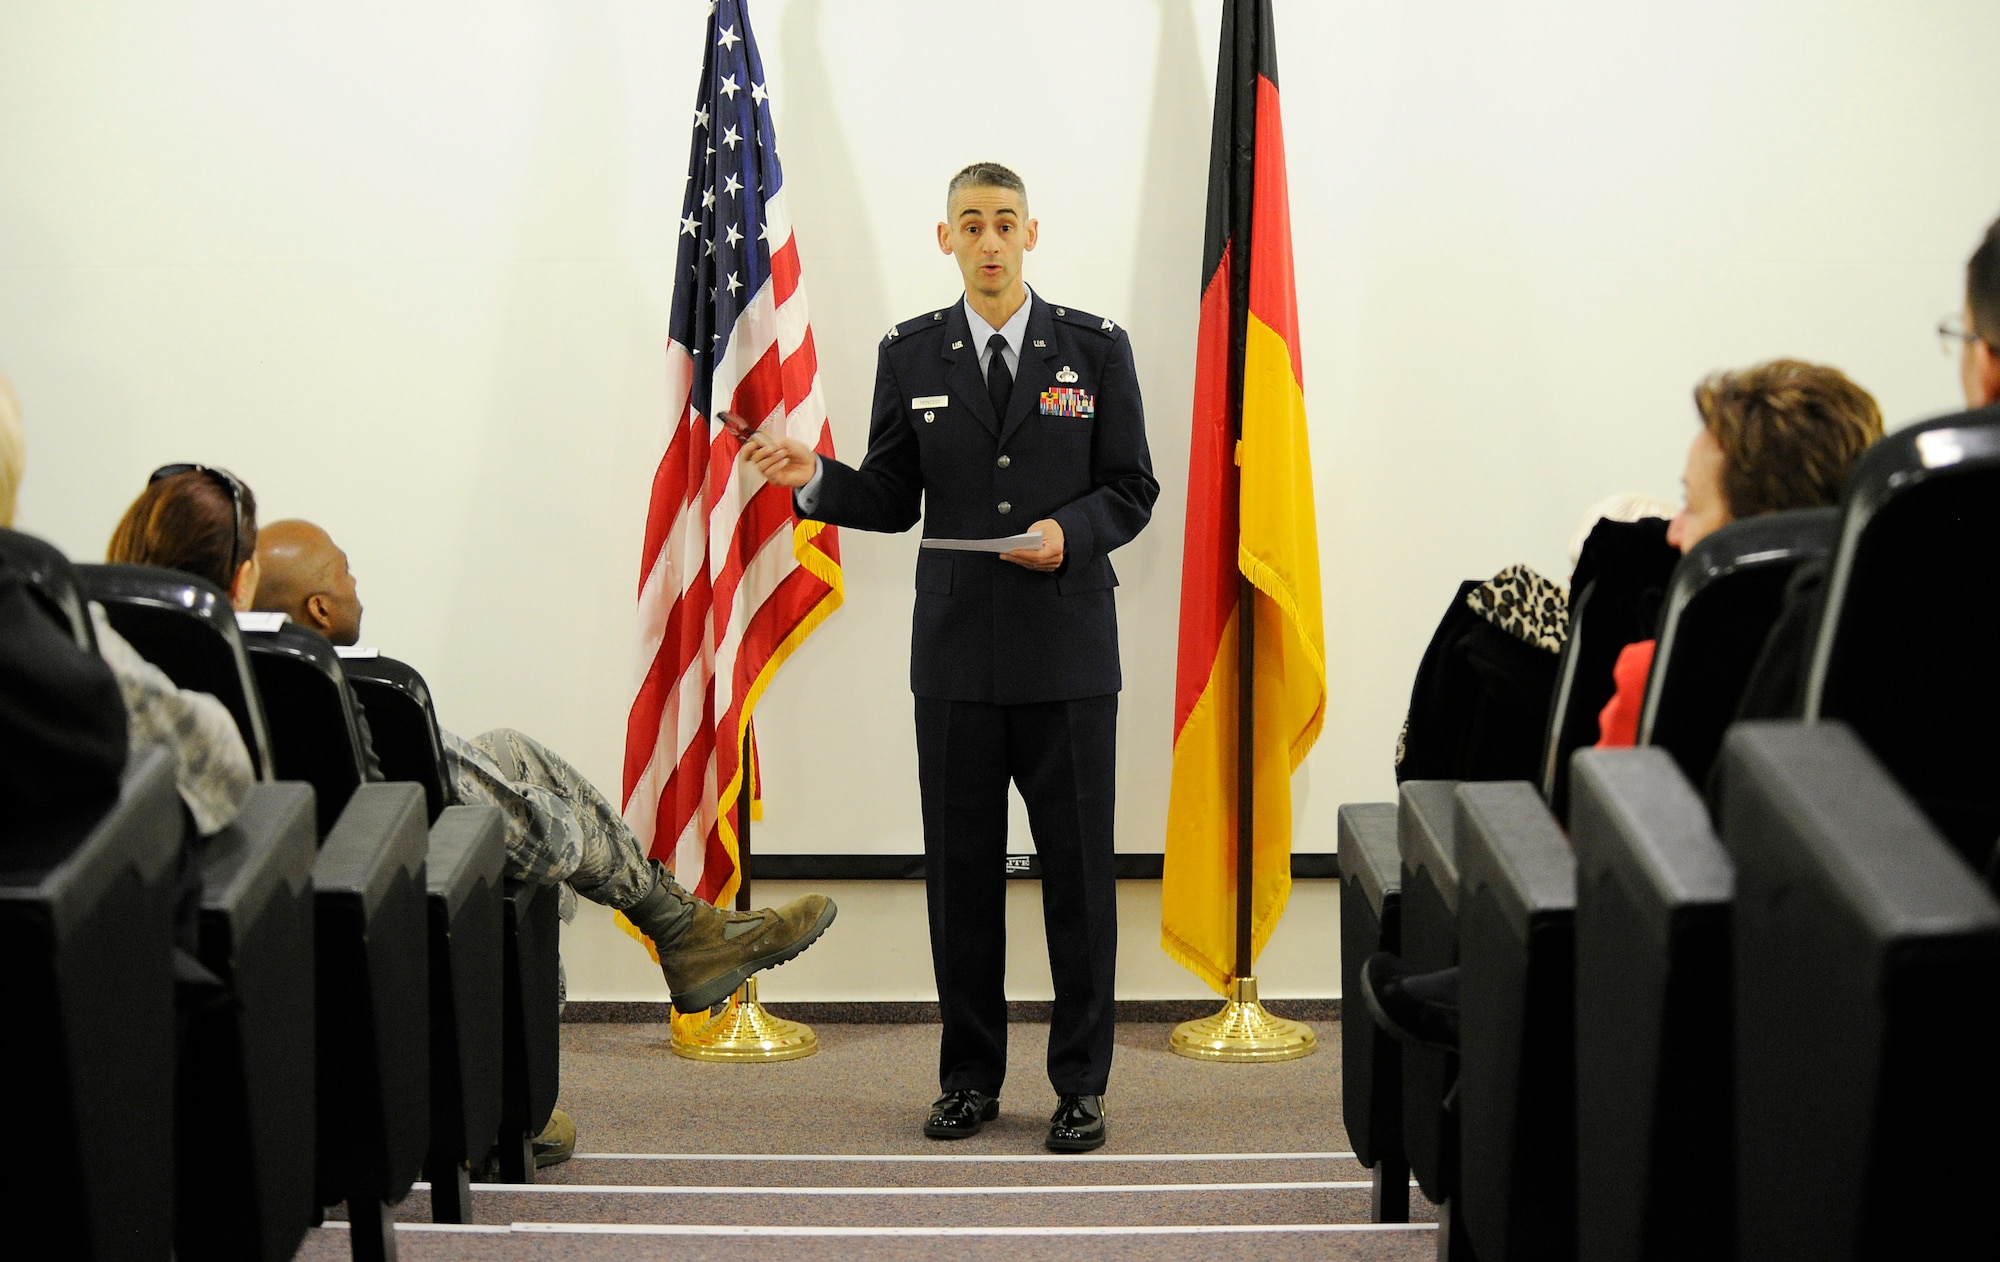 Col. Mario Troncoso, Air Force Installation Contracting Agency director, speaks to members of the 764th Specialized Contracting Squadron about the accomplishments of their new commander, Maj. Rachelle Osborn, during an activation ceremony at Ramstein Air Base, Germany Oct. 2, 2013. The 764th SCONS is a newly formed squadron that will provide contracting support to all of U.S. Air Forces Europe and Air Forces Africa bases for projects worth more than $2 million or if allocated money will be used at multiple locations. Osborn was previously in charge of the specialized contracting flight under the 700th Contracting Squadron. (U.S. Air Force photo/ Staff Sgt. Ryan Crane)